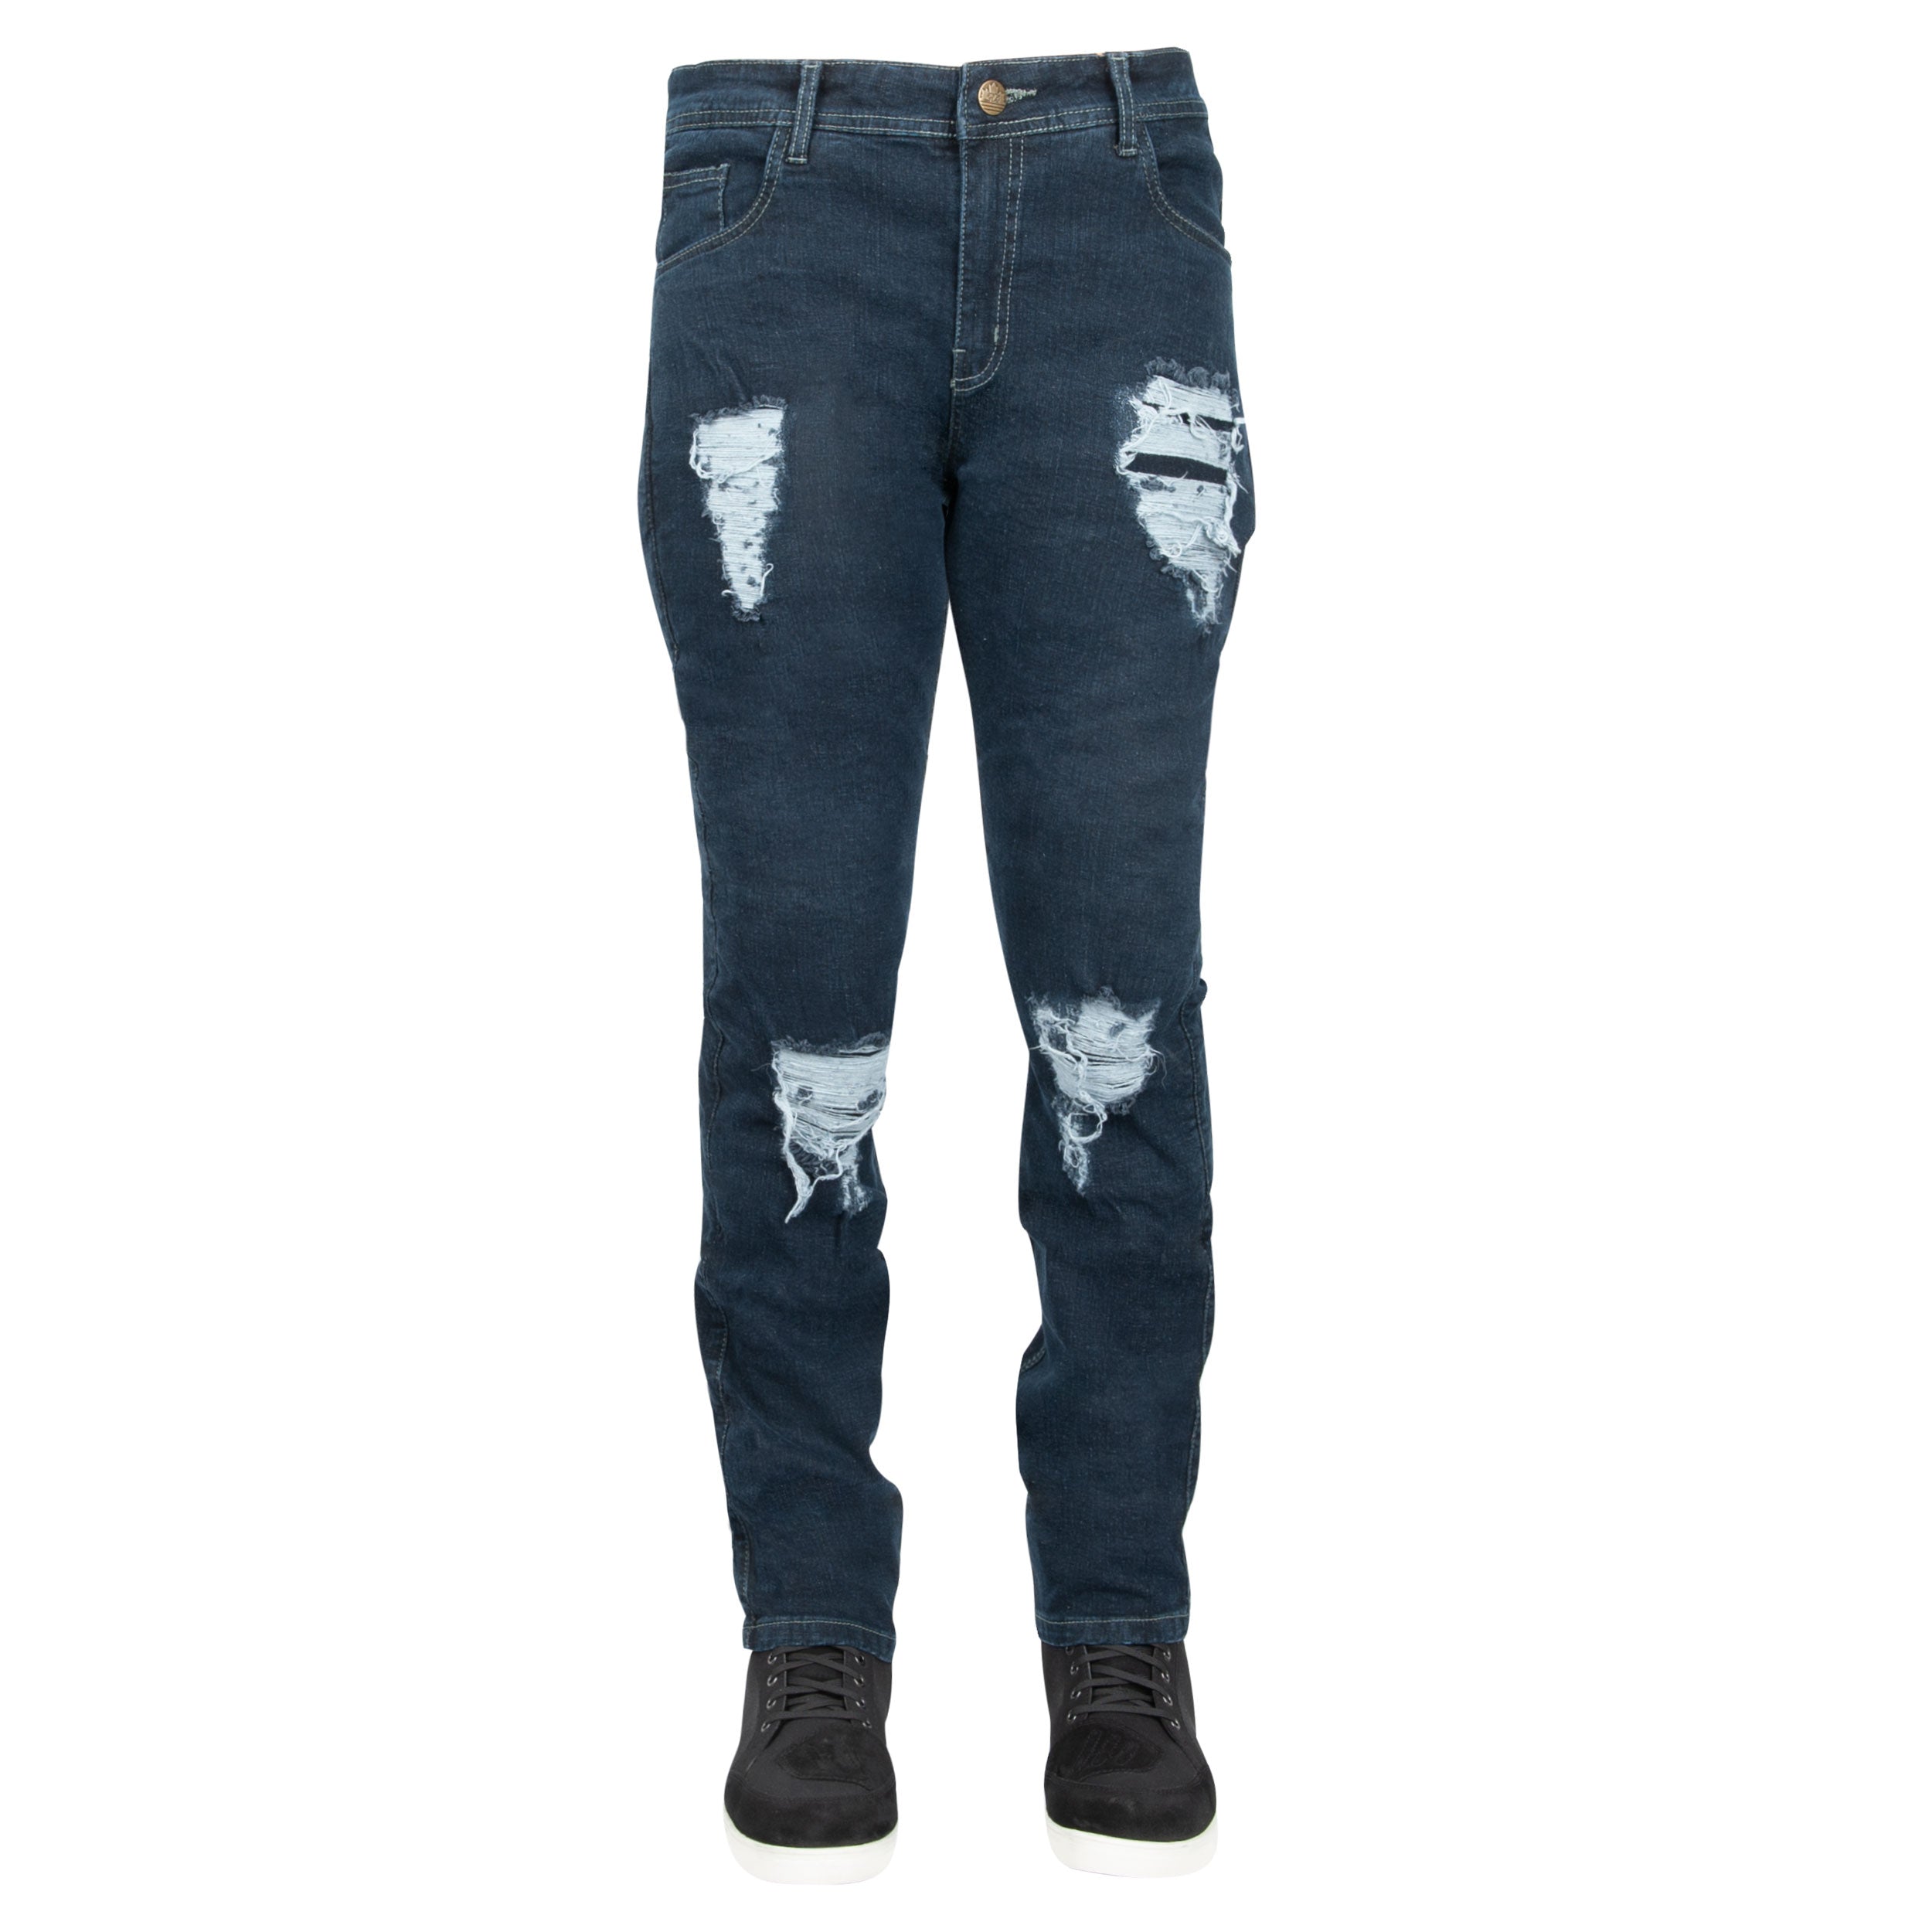 Joe Rocket Canada Women's Aurora Reinforced and Armoured Motorcycle Jeans